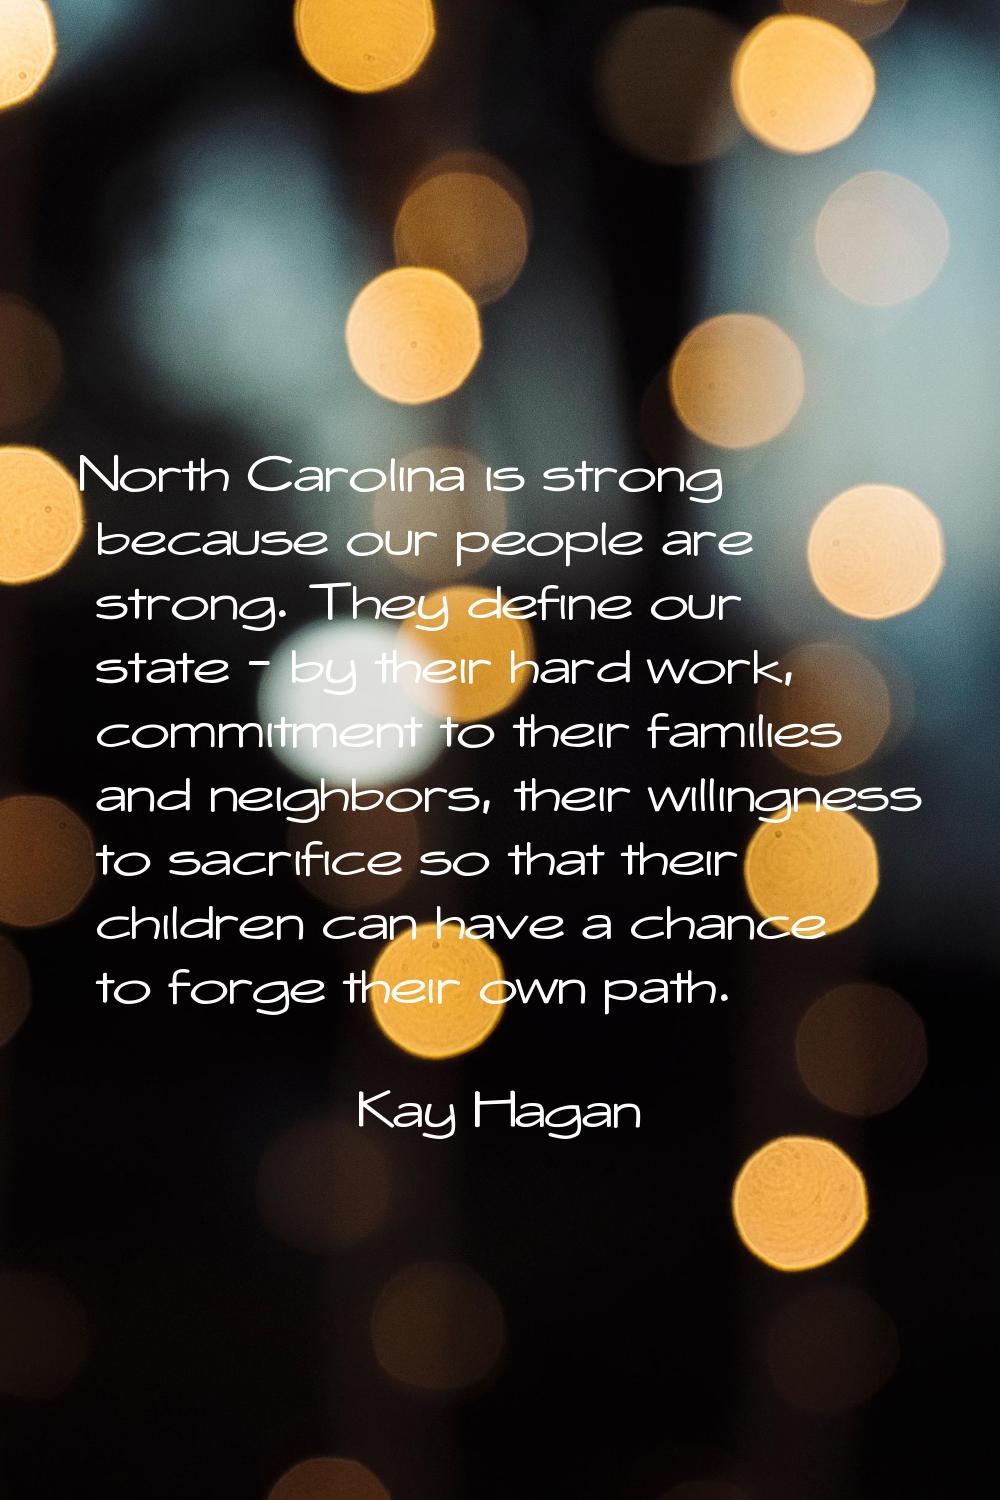 North Carolina is strong because our people are strong. They define our state - by their hard work,